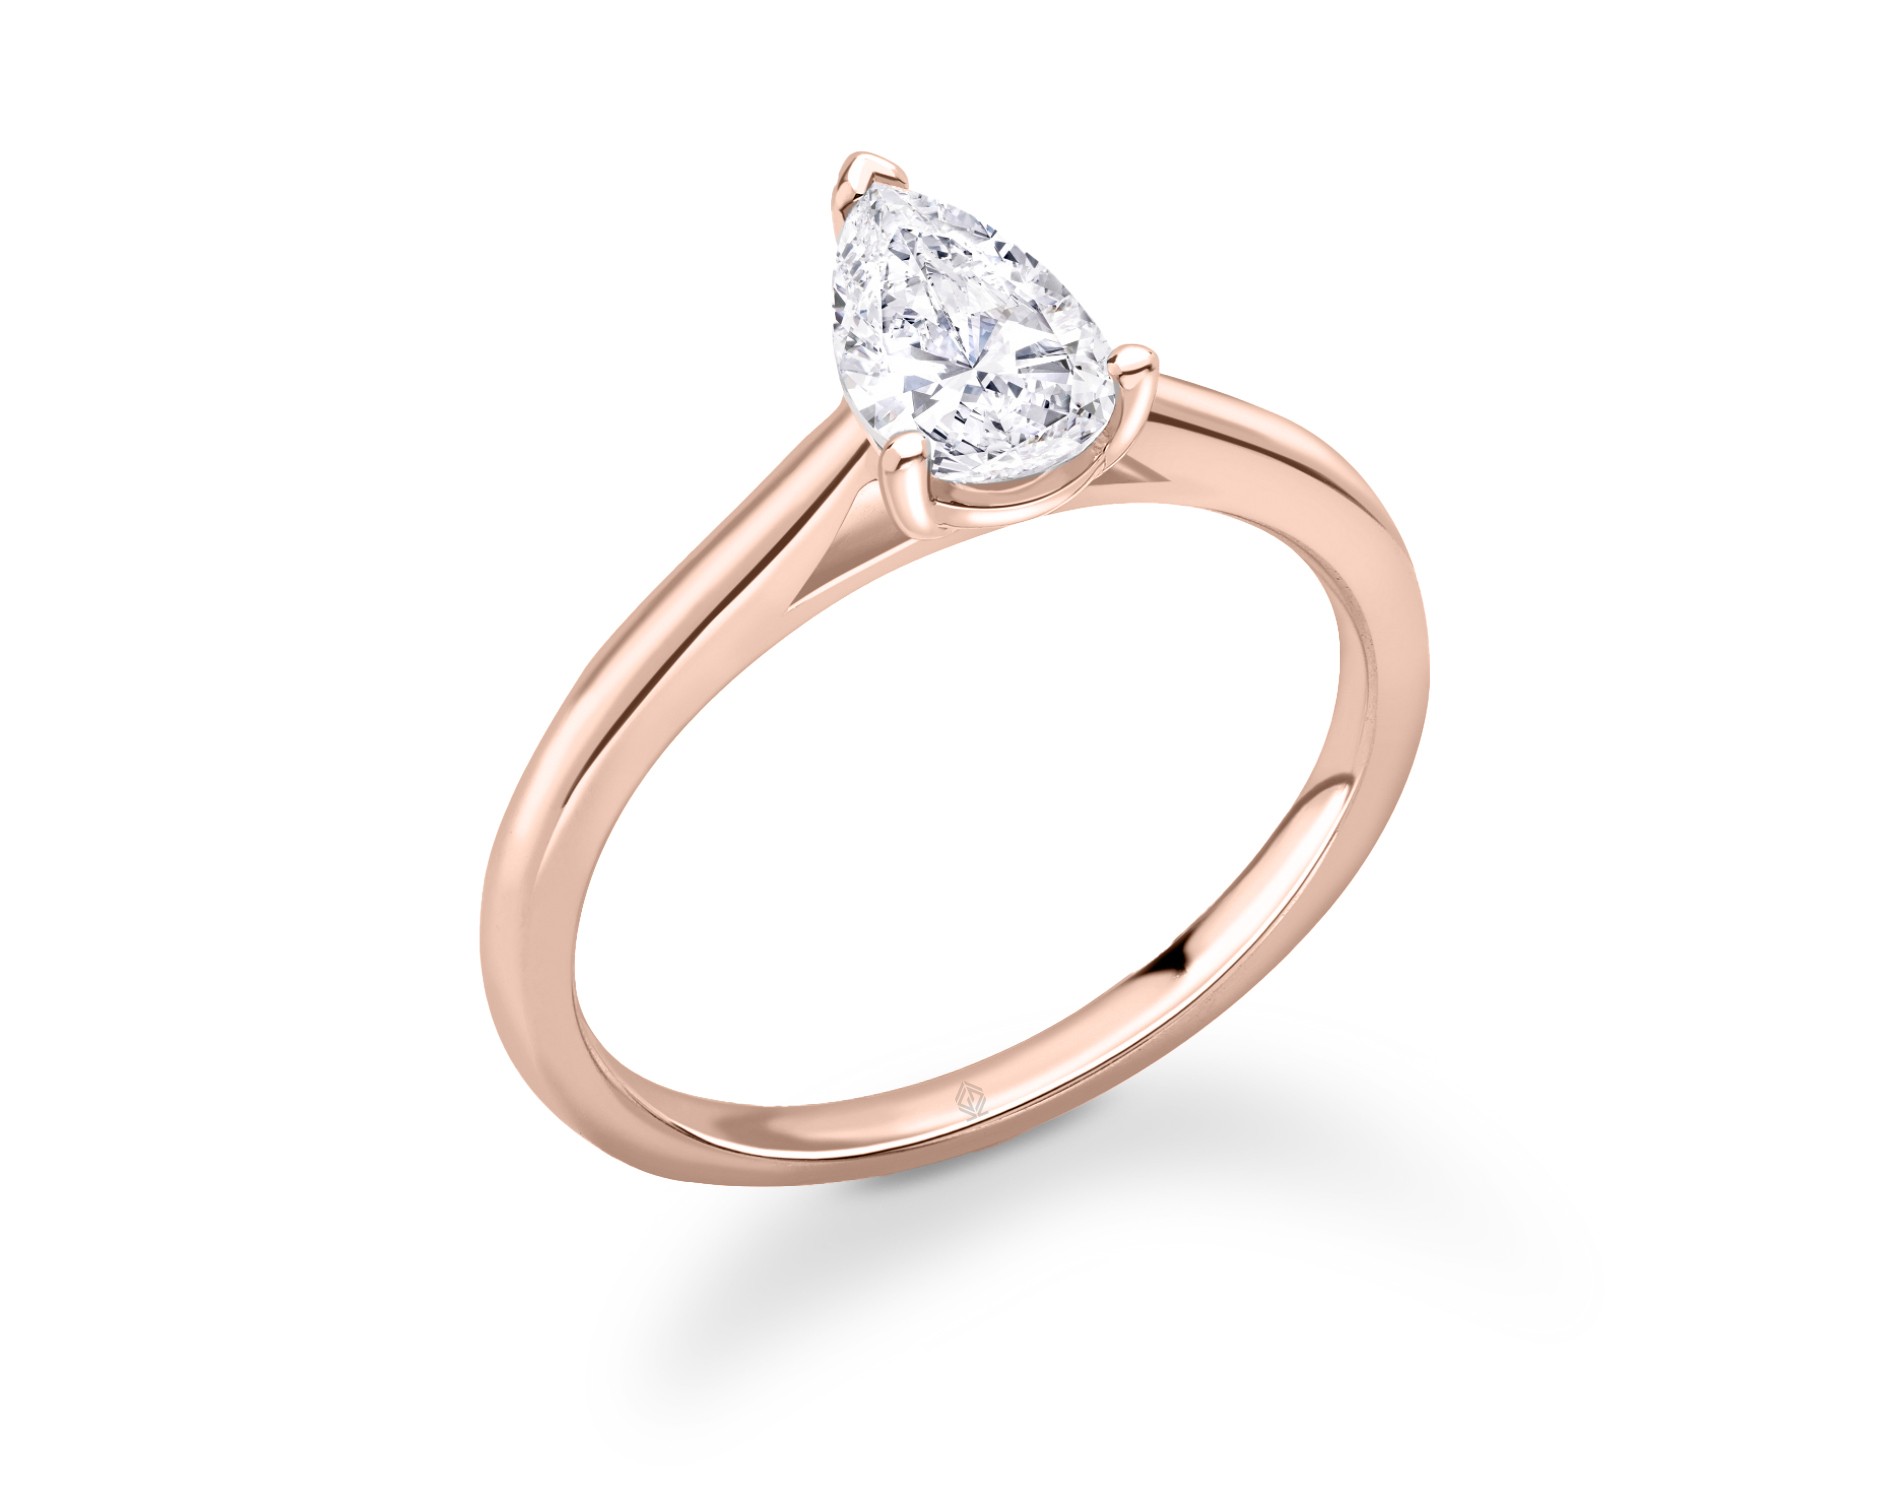 18K ROSE GOLD PEAR CUT SOLITAIRE DIAMOND ENGAGEMENT RING